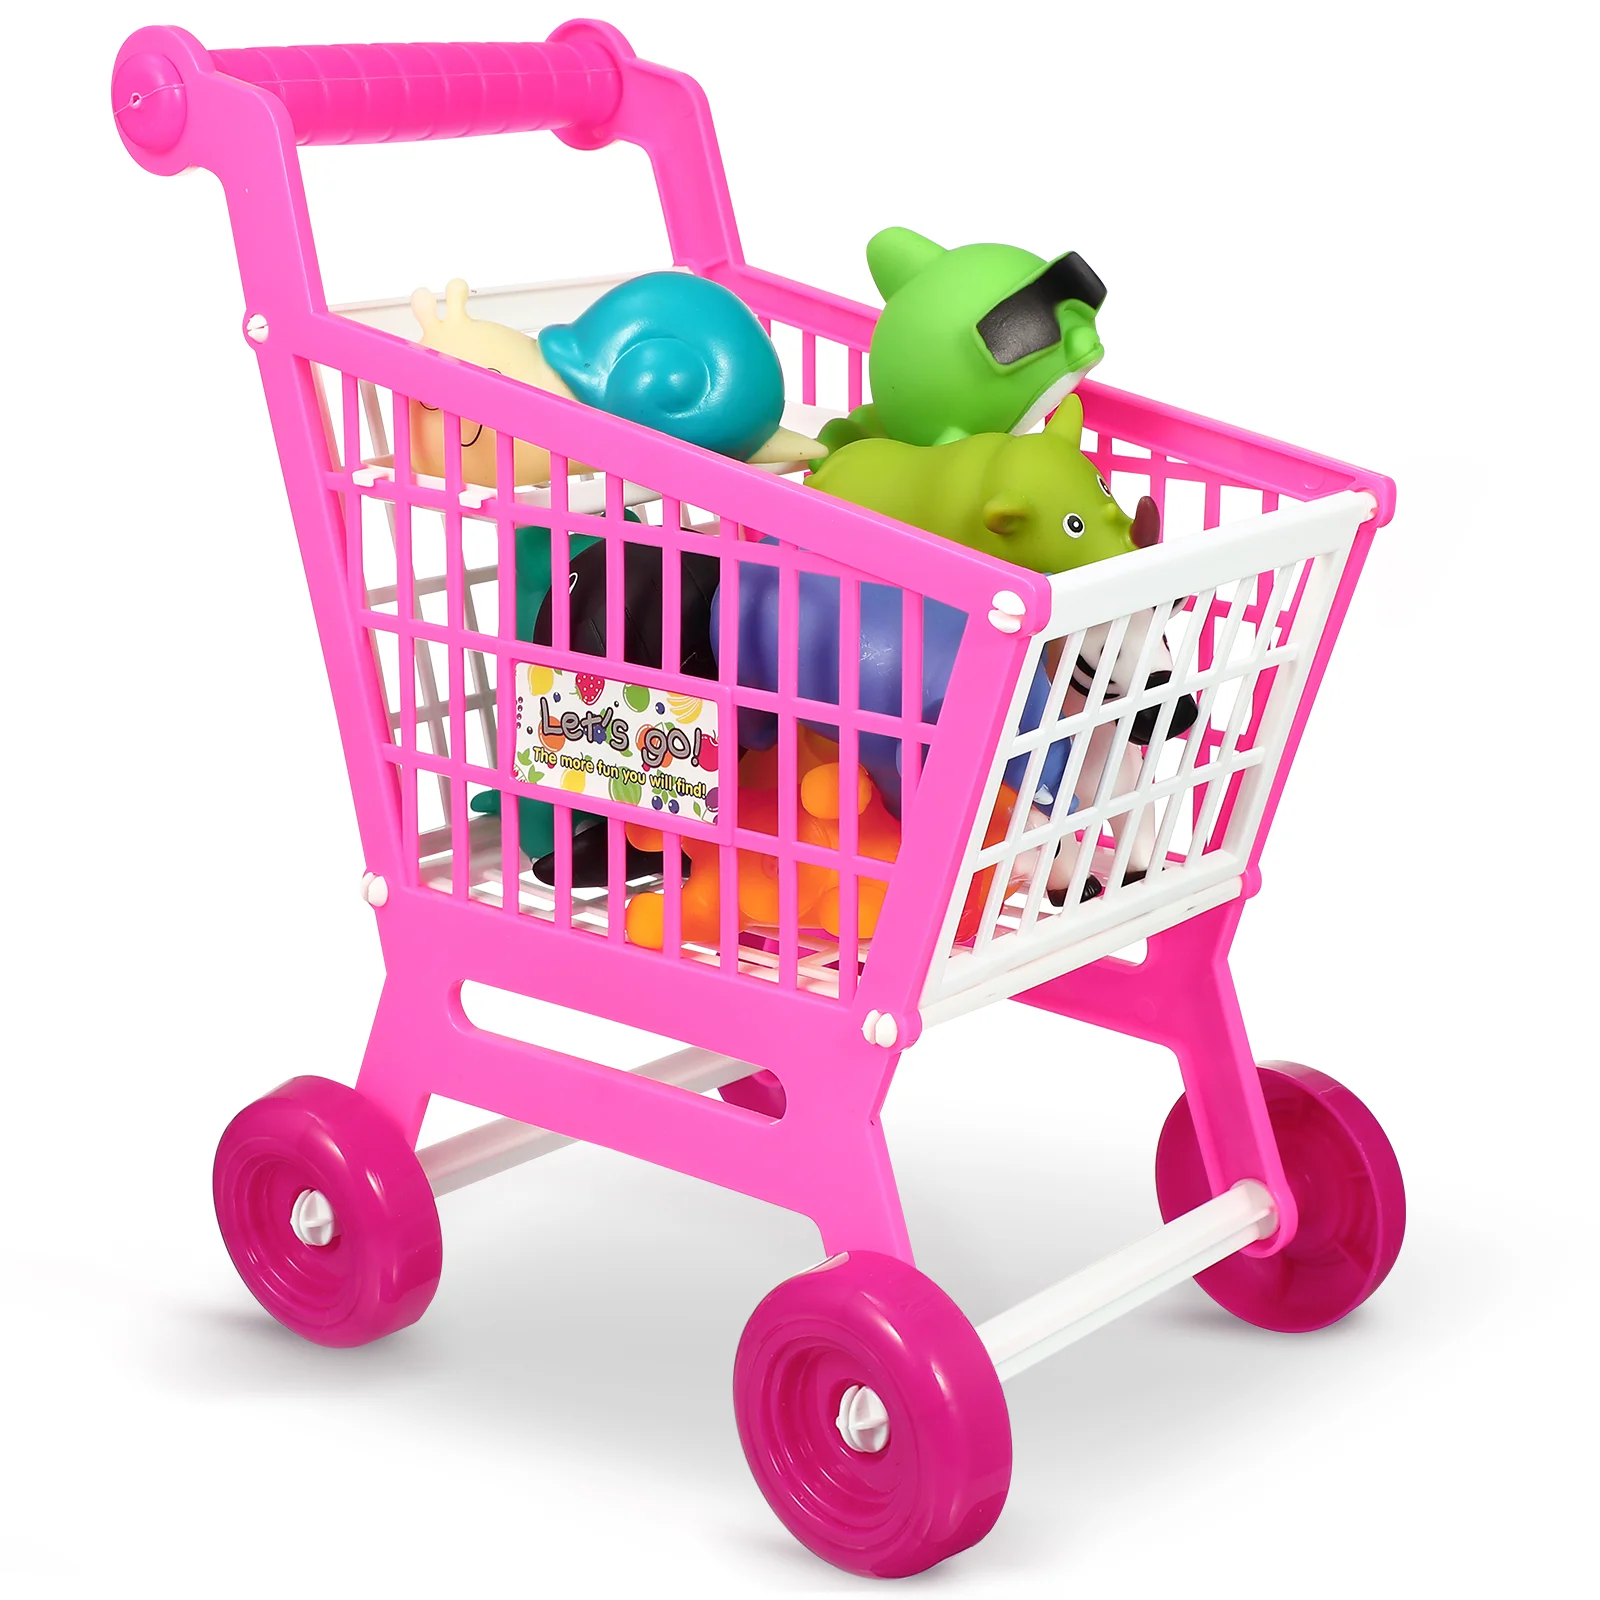 

Trolley Plastic Shopping Cart Mini Grocery Toy Toddler Kids Carts Toddlers Toys Vans